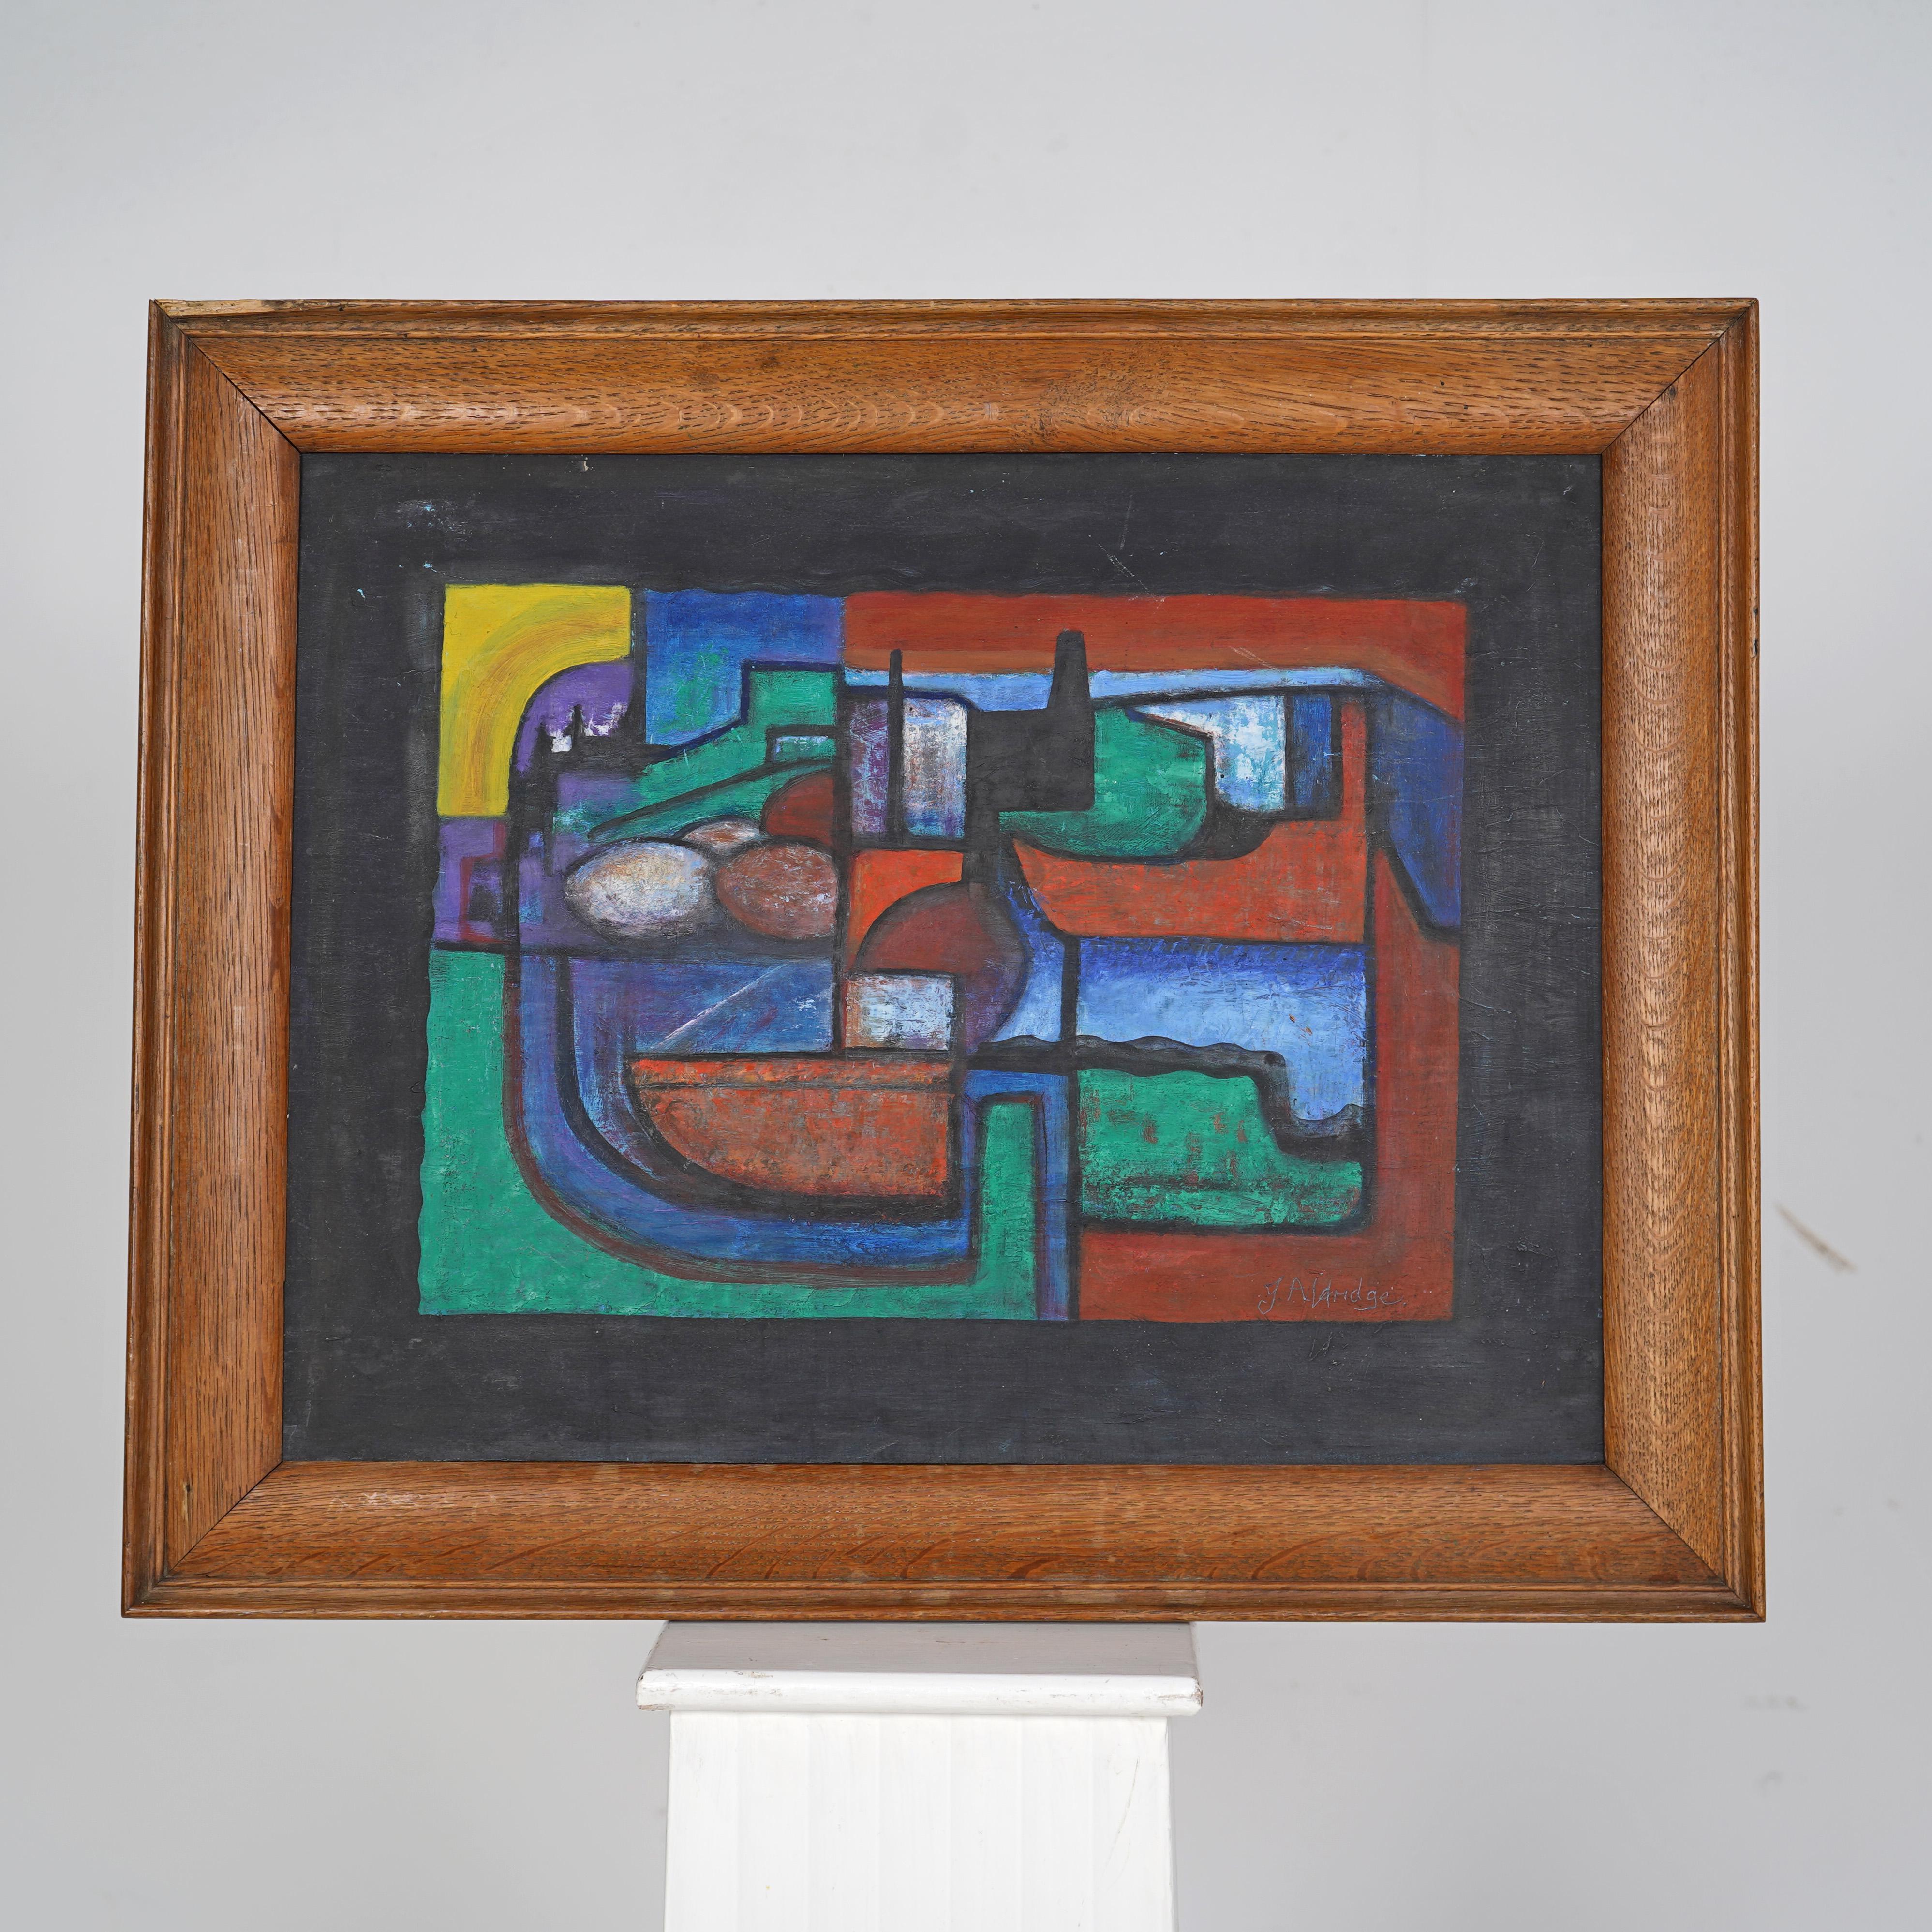 J.Alderidge oil on board painting.
Modernist abstract painting. 
The frame has some damage to the top left, shown in pictures.

Dimensions

H 50cm, W 62cm, D 3cm
 
Condition 
Please do take a careful look at all our pictures and note that these are